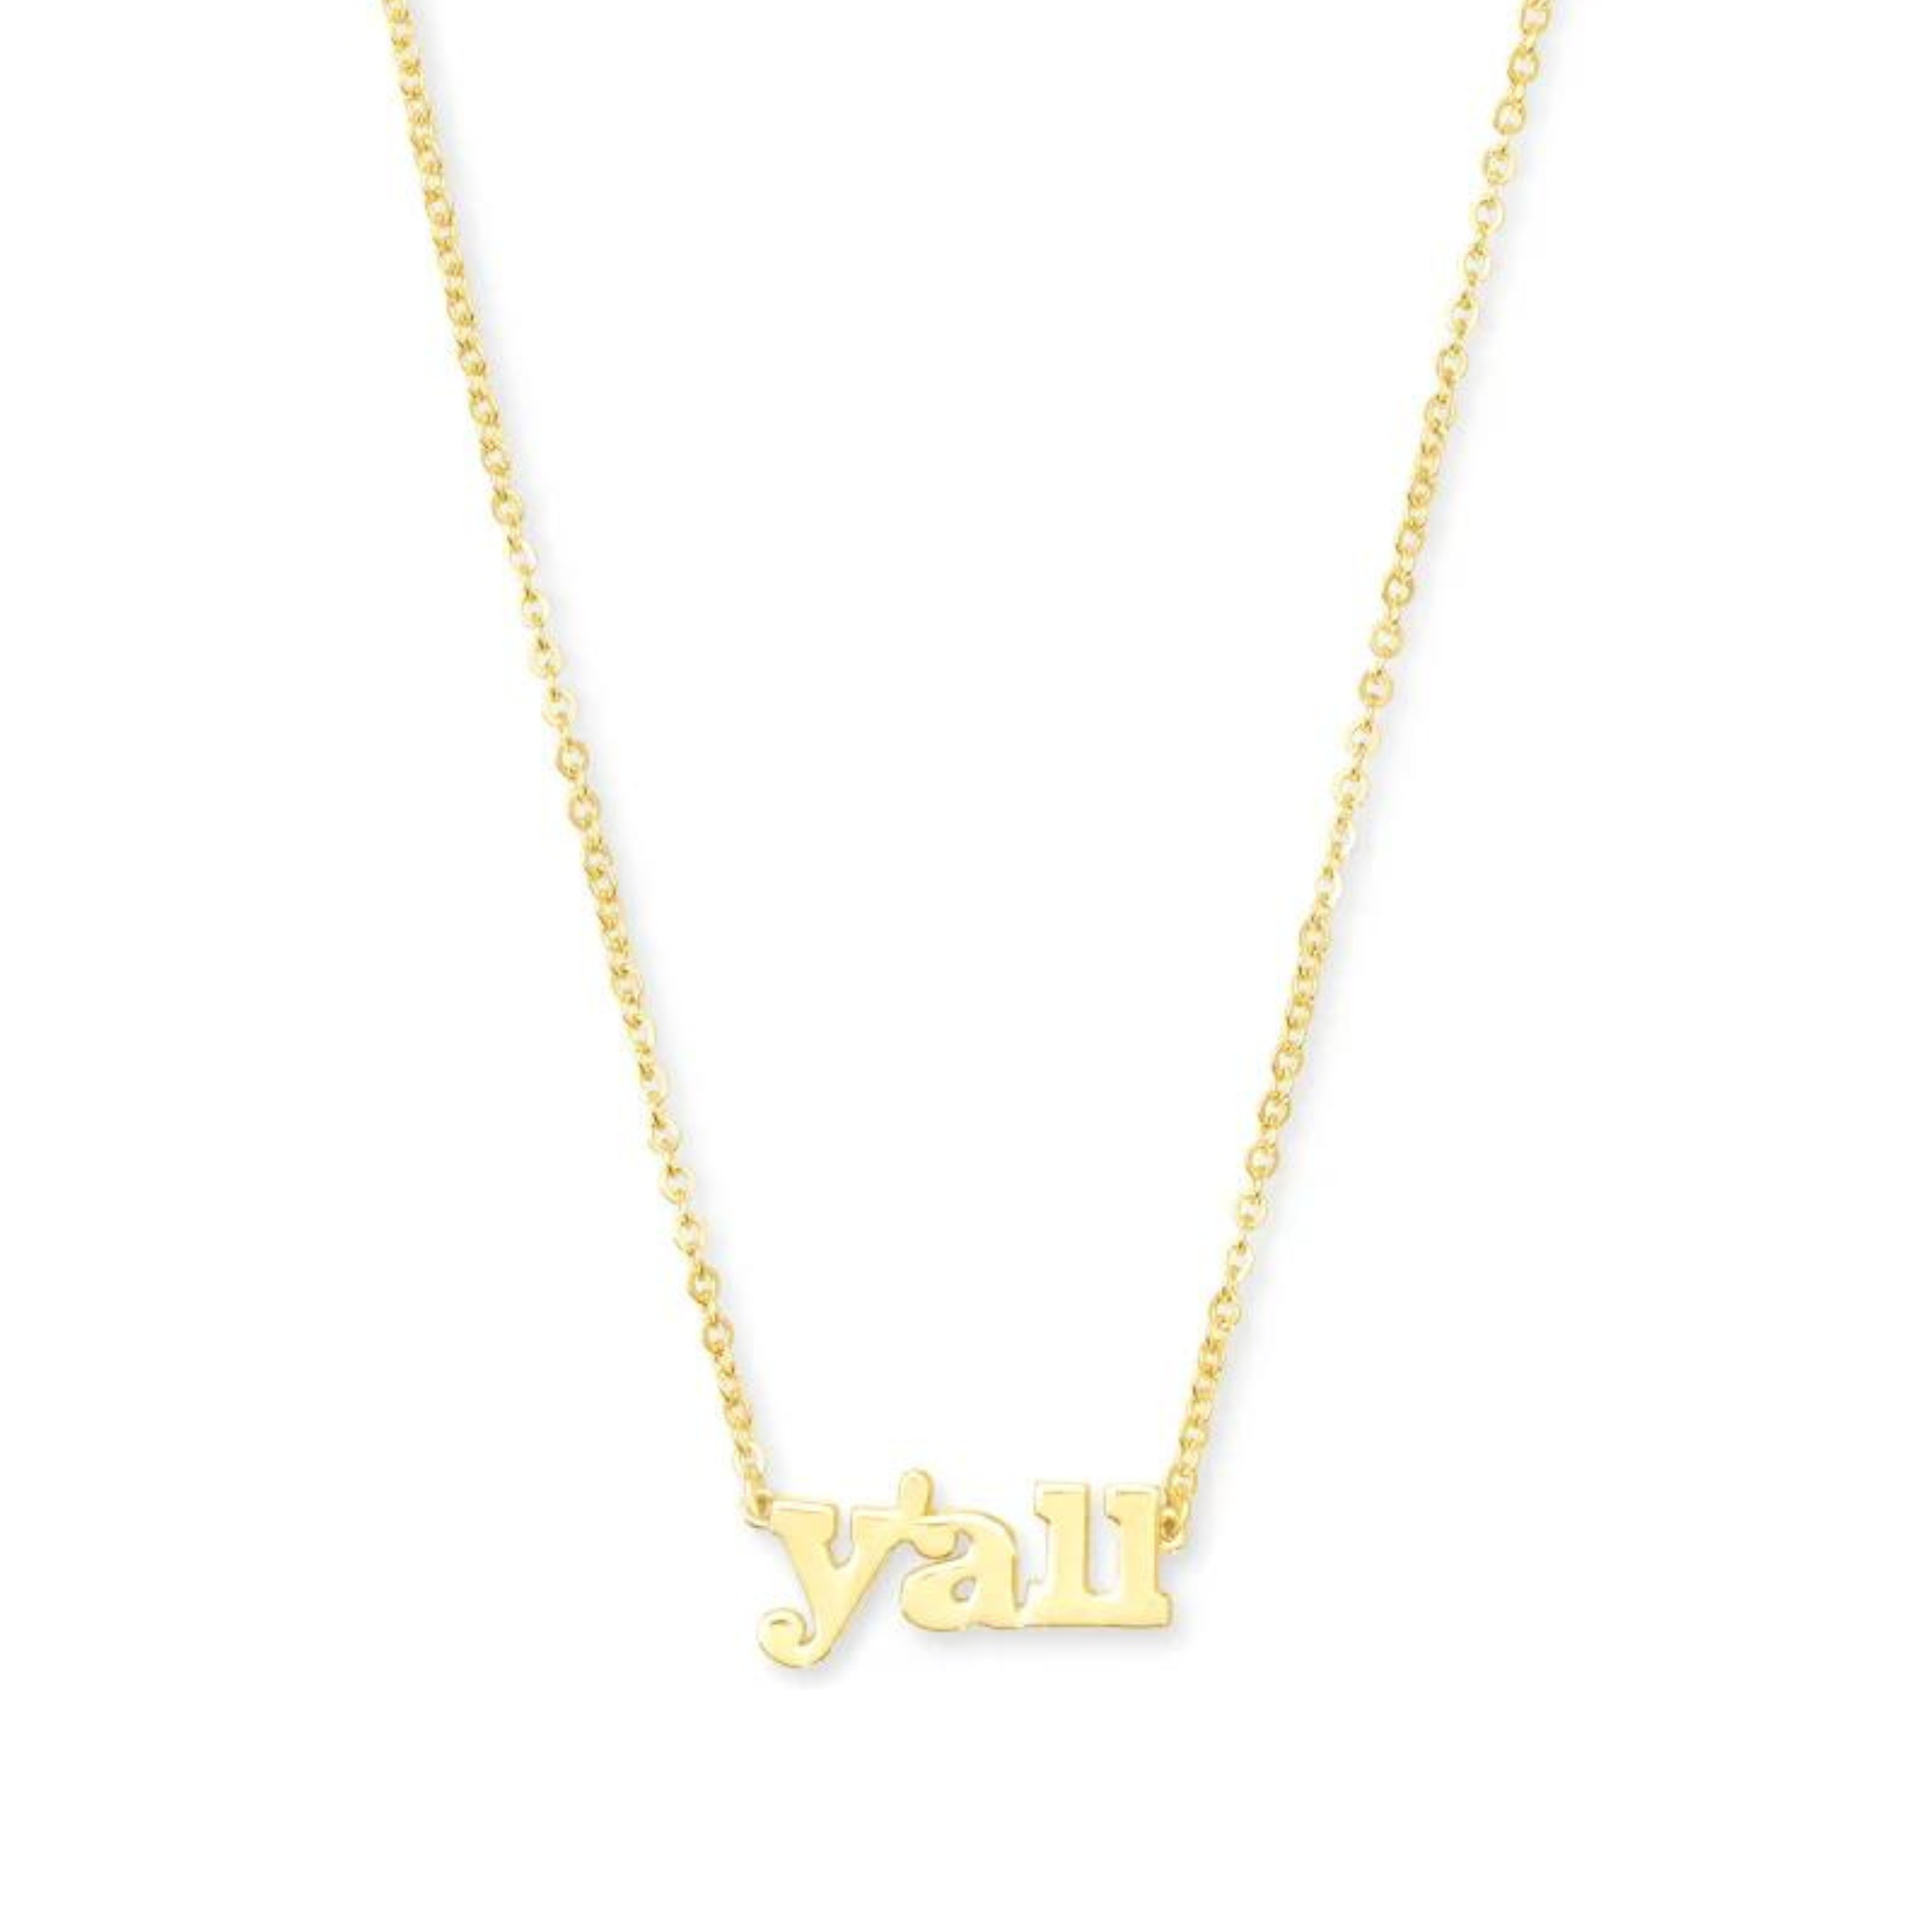 Gold chain necklace with theh word y'all, pictured on a white background.